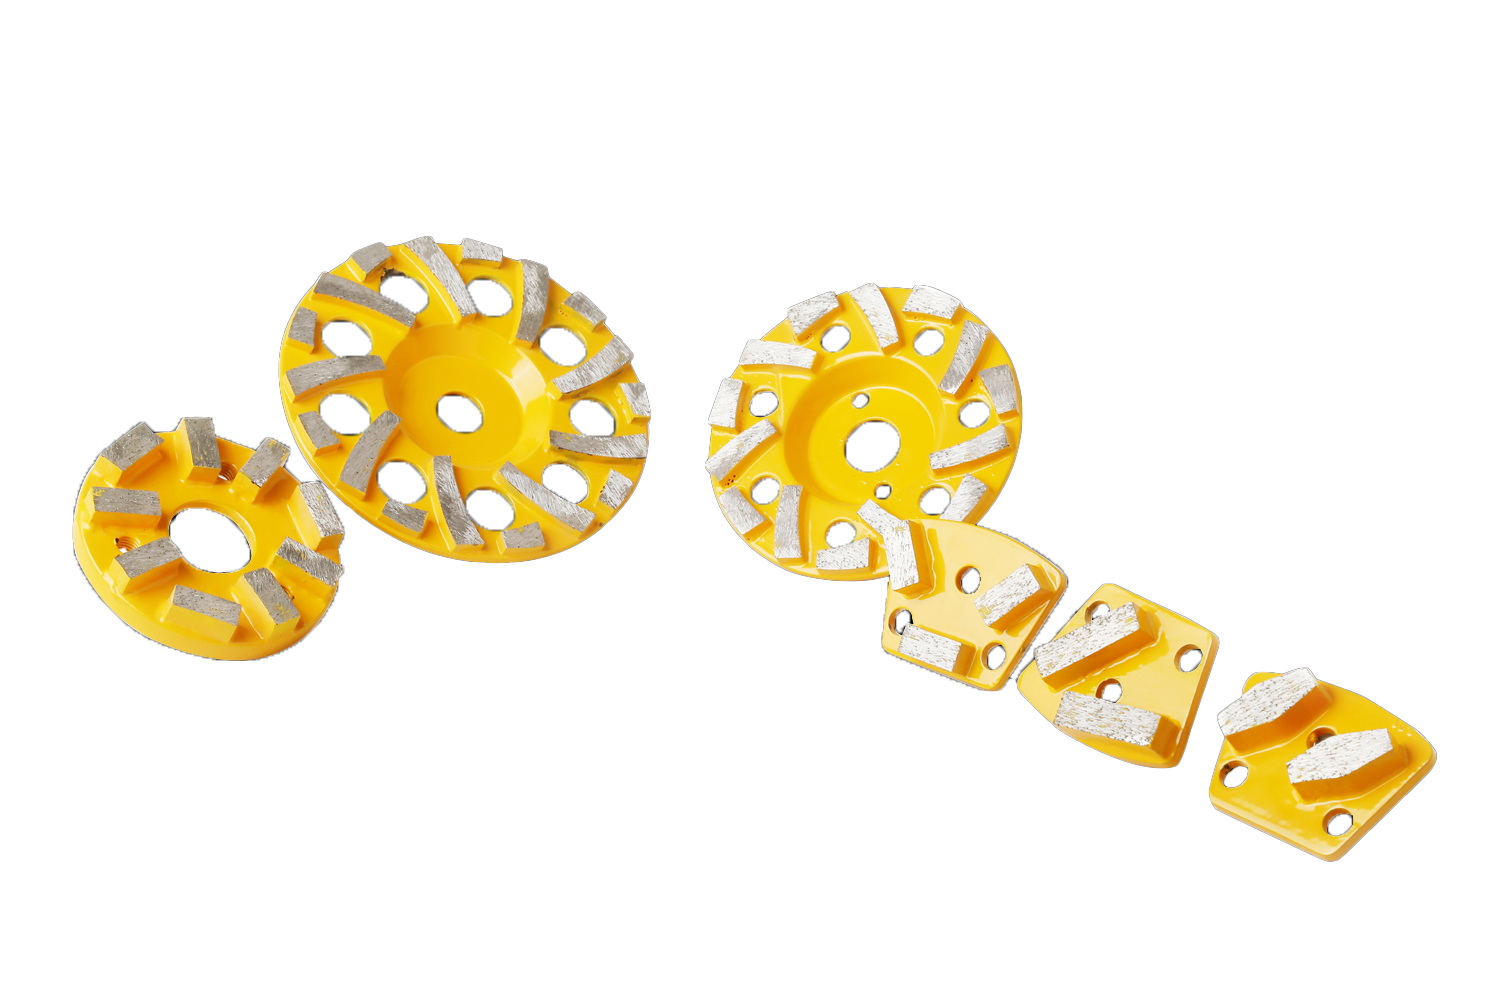 Grinding cup wheels are designed to use for grinding; cutting; polishing concrete, marble, granite, Grinding wheels are essential concrete tools grinding stone, floor for self leveling concrete.We offer grinding discs for concrete leveling, grinding